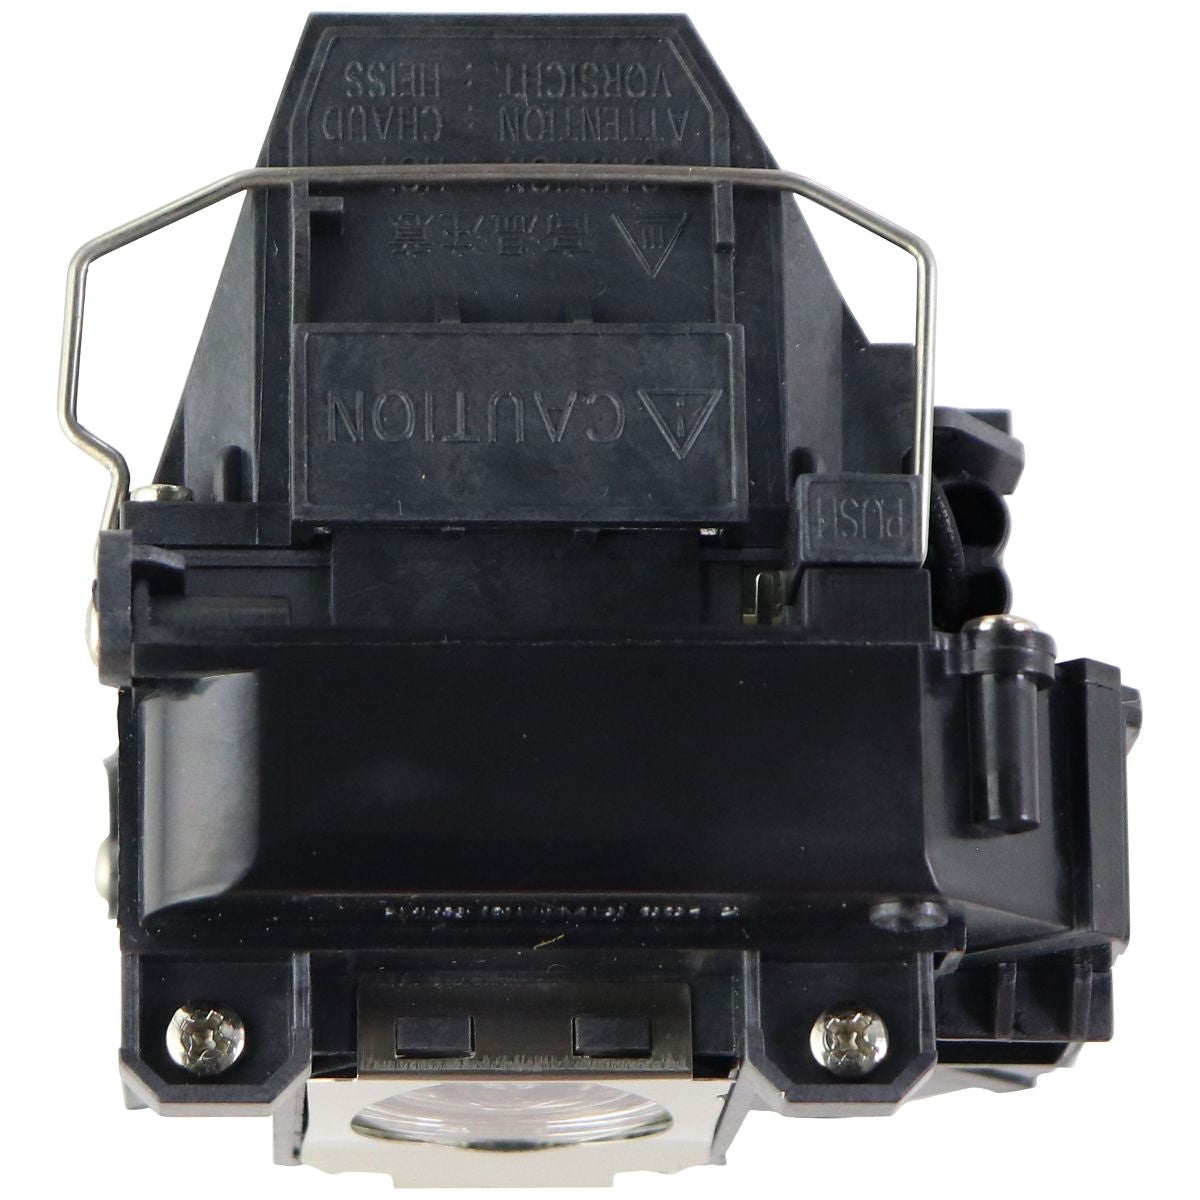 Lamp for Epson 1835 Projector - Black (V13H010L61-C) Home Improvement - Other Home Improvement Unbranded    - Simple Cell Bulk Wholesale Pricing - USA Seller